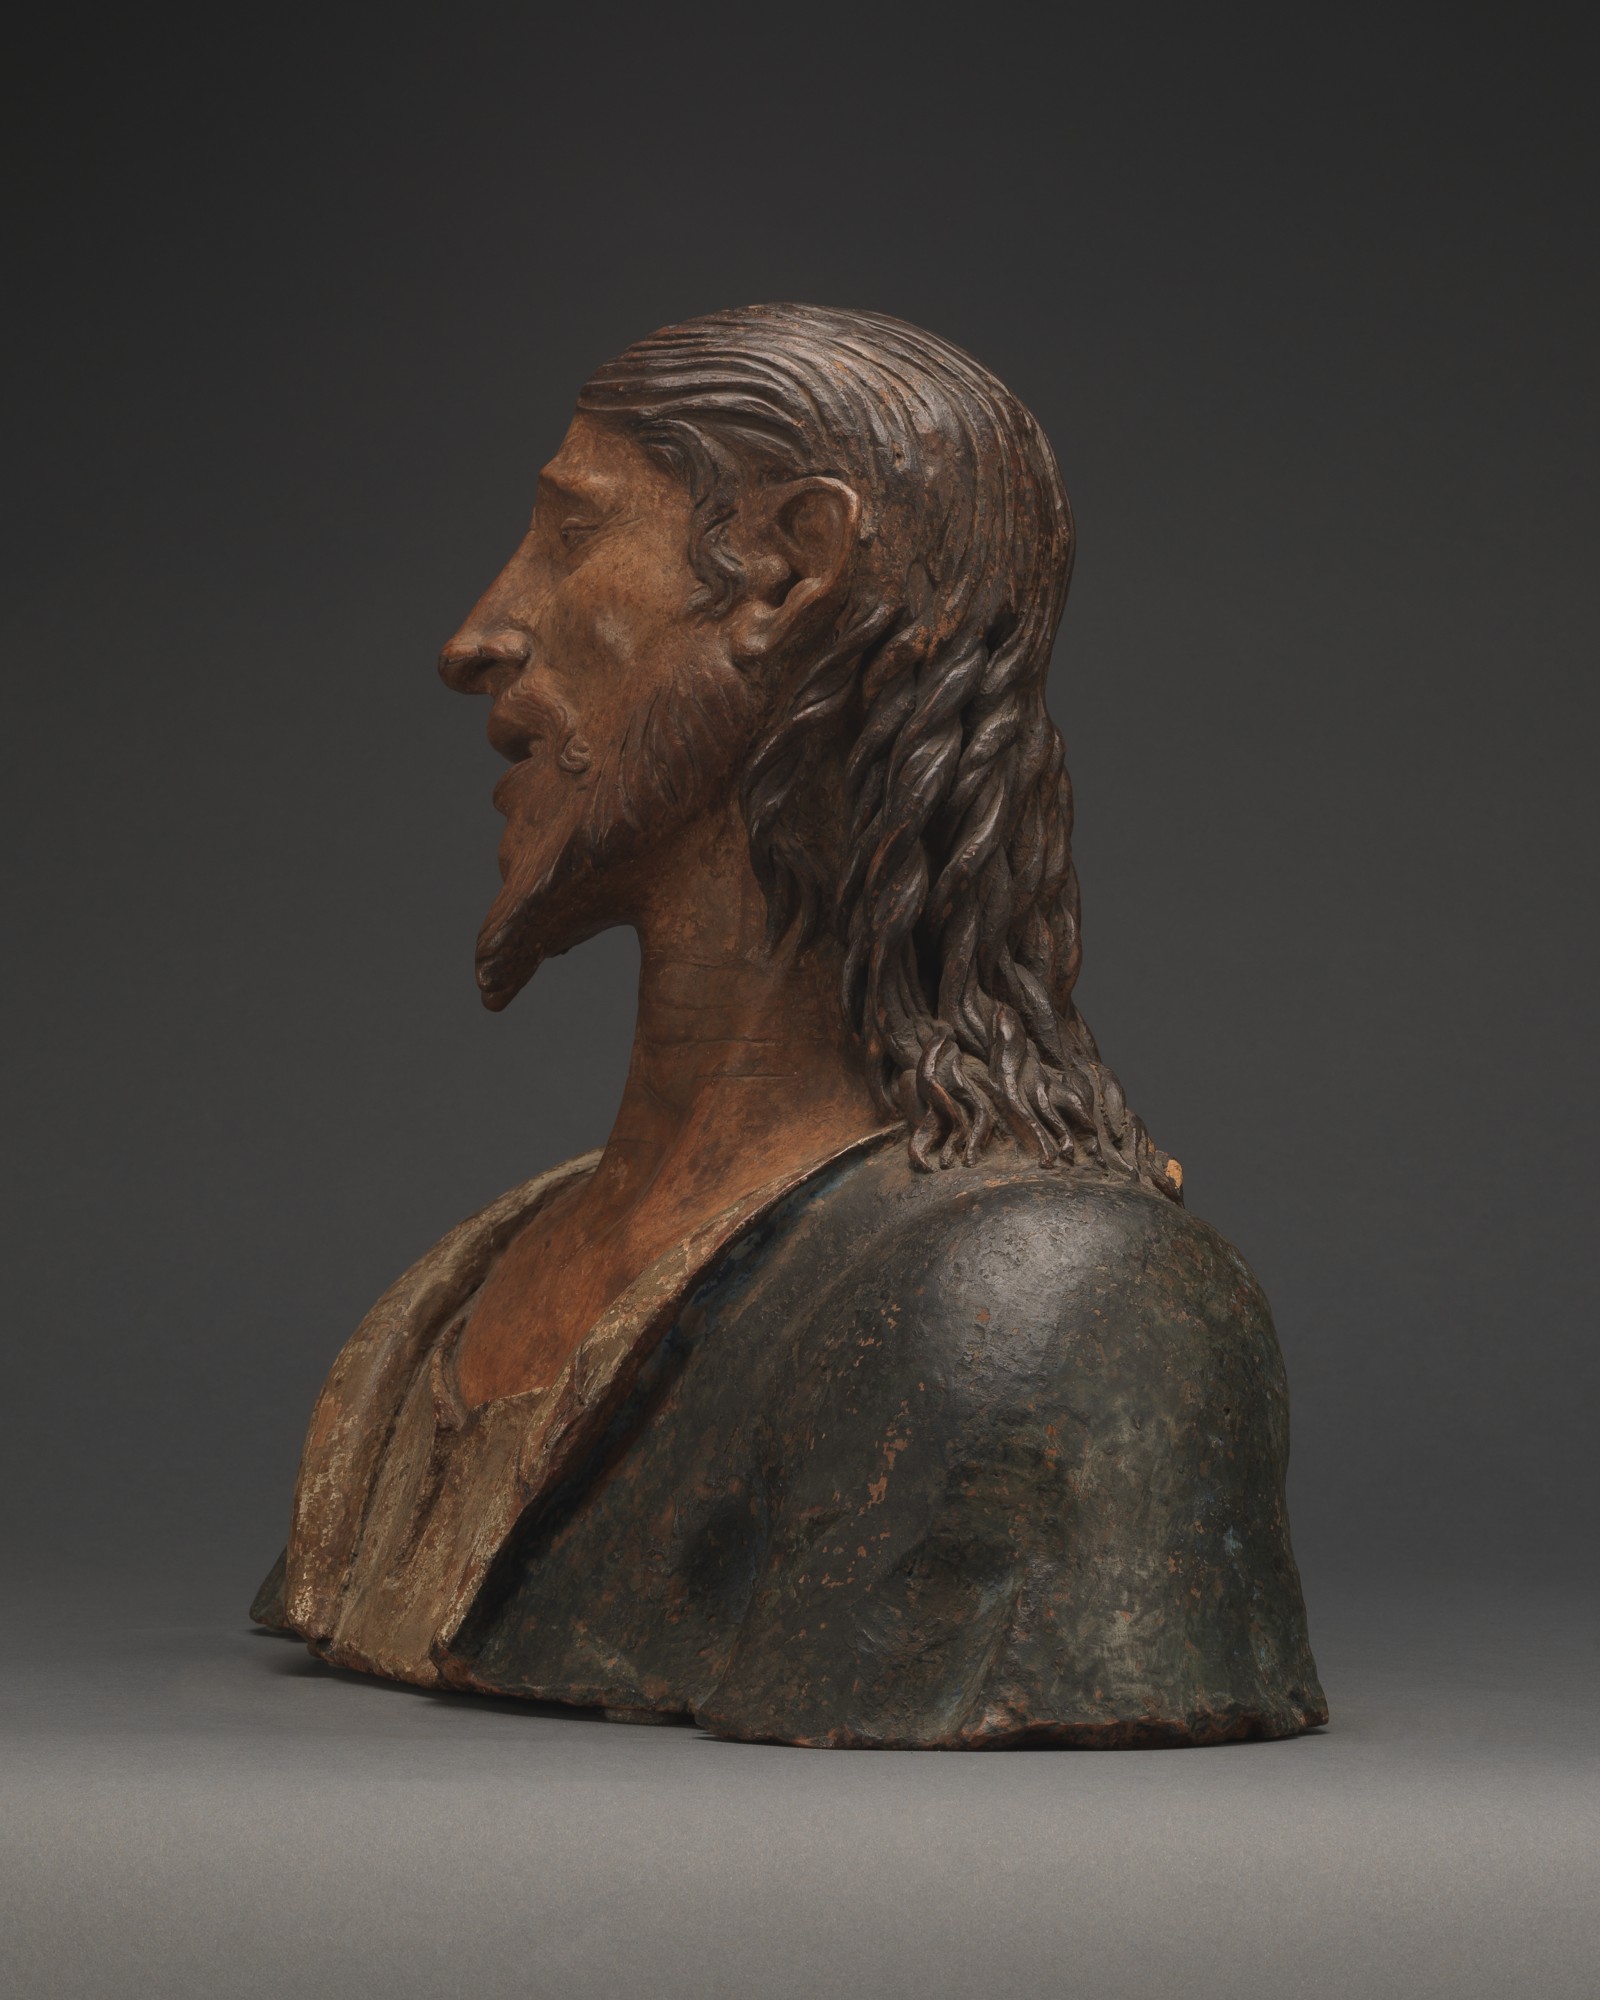 Bust of Christ as the Man of Sorrows, Attributed to Agostino de Fondulis (c. 1450 – 1522?), It